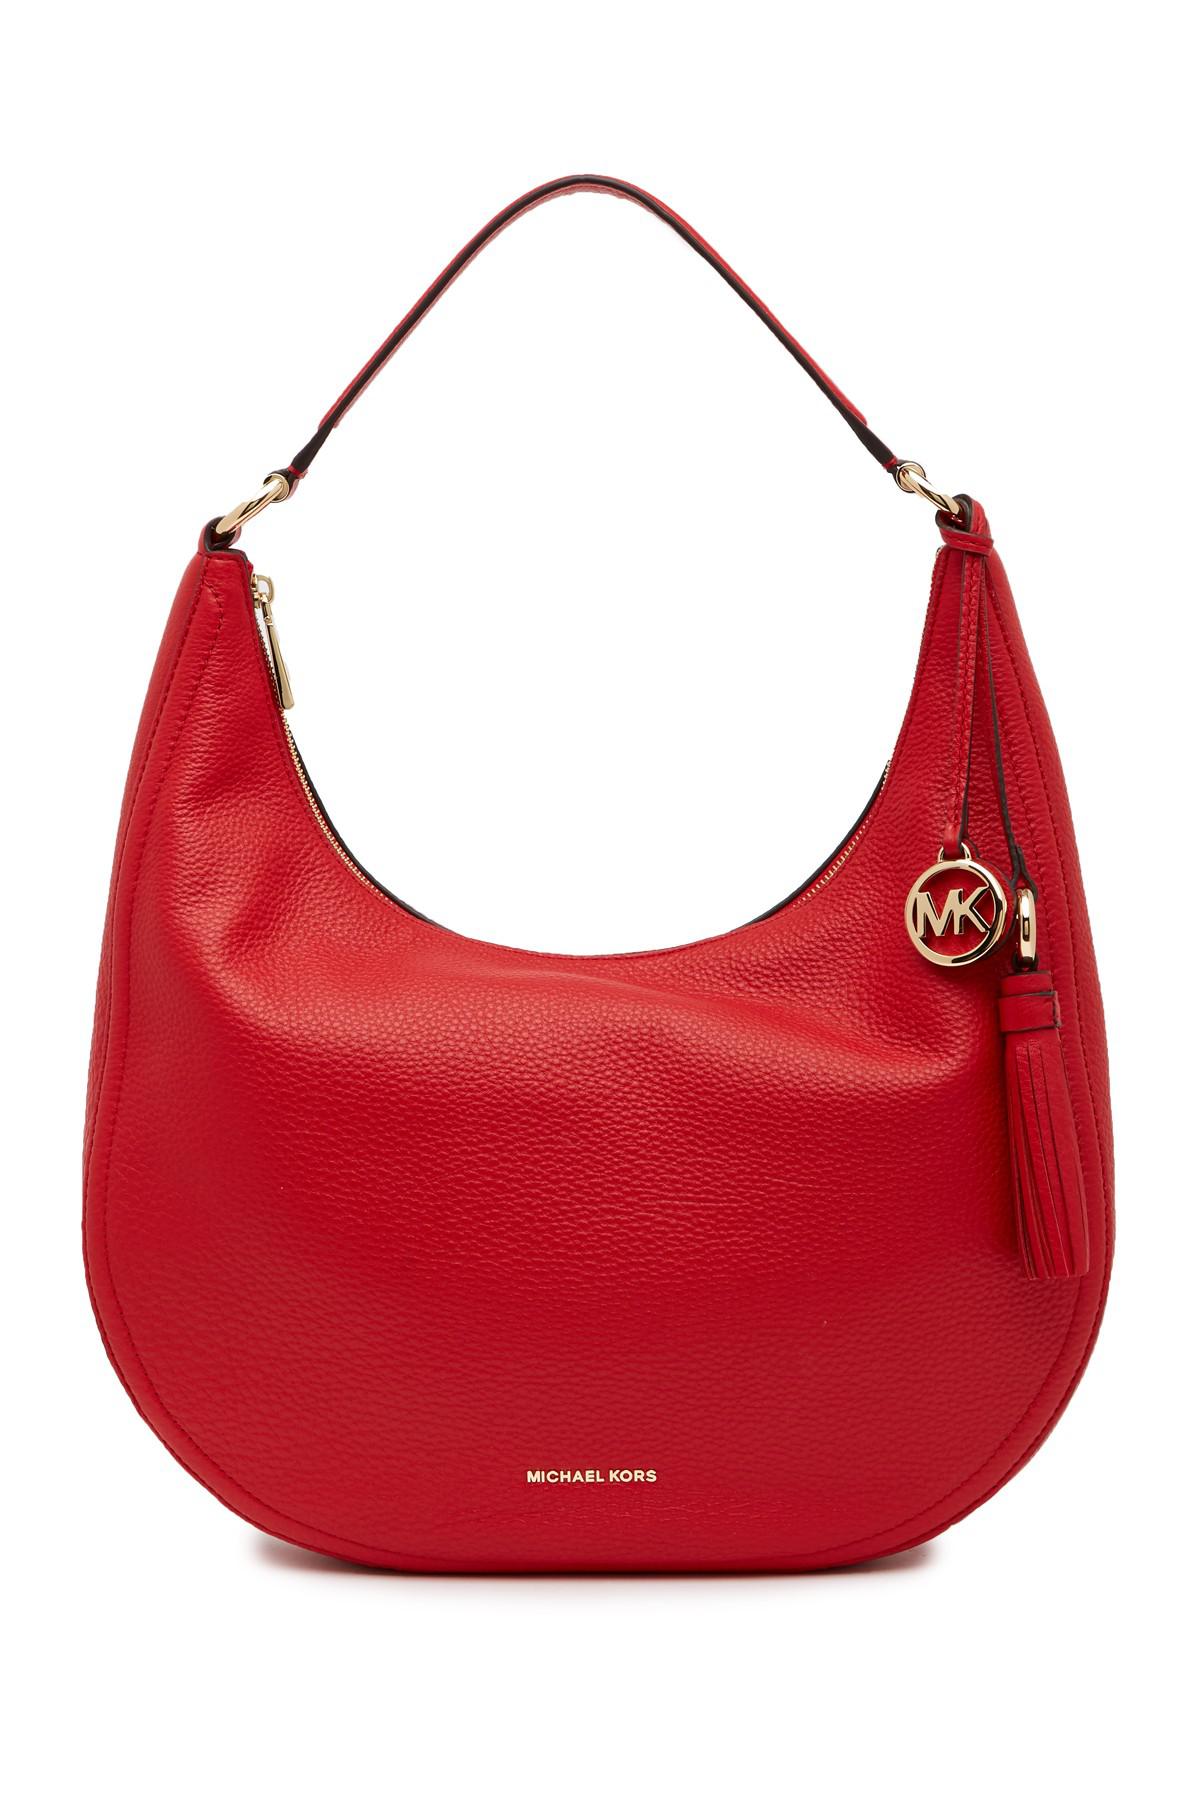 Michael Kors Large Leather Hobo Bag in Red | Lyst